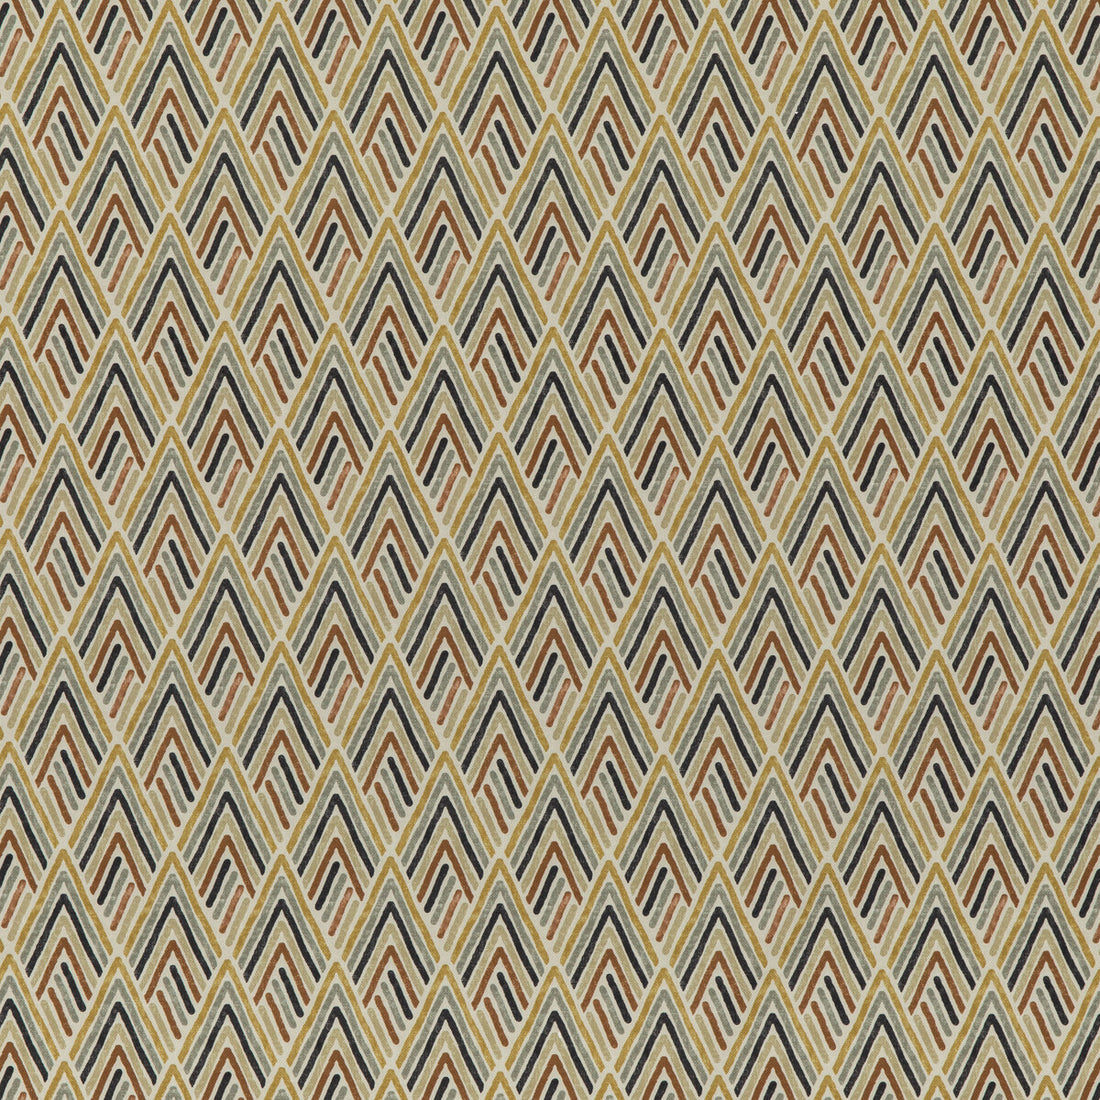 Vista fabric in spice color - pattern ED75041.2.0 - by Threads in the Nala Prints collection